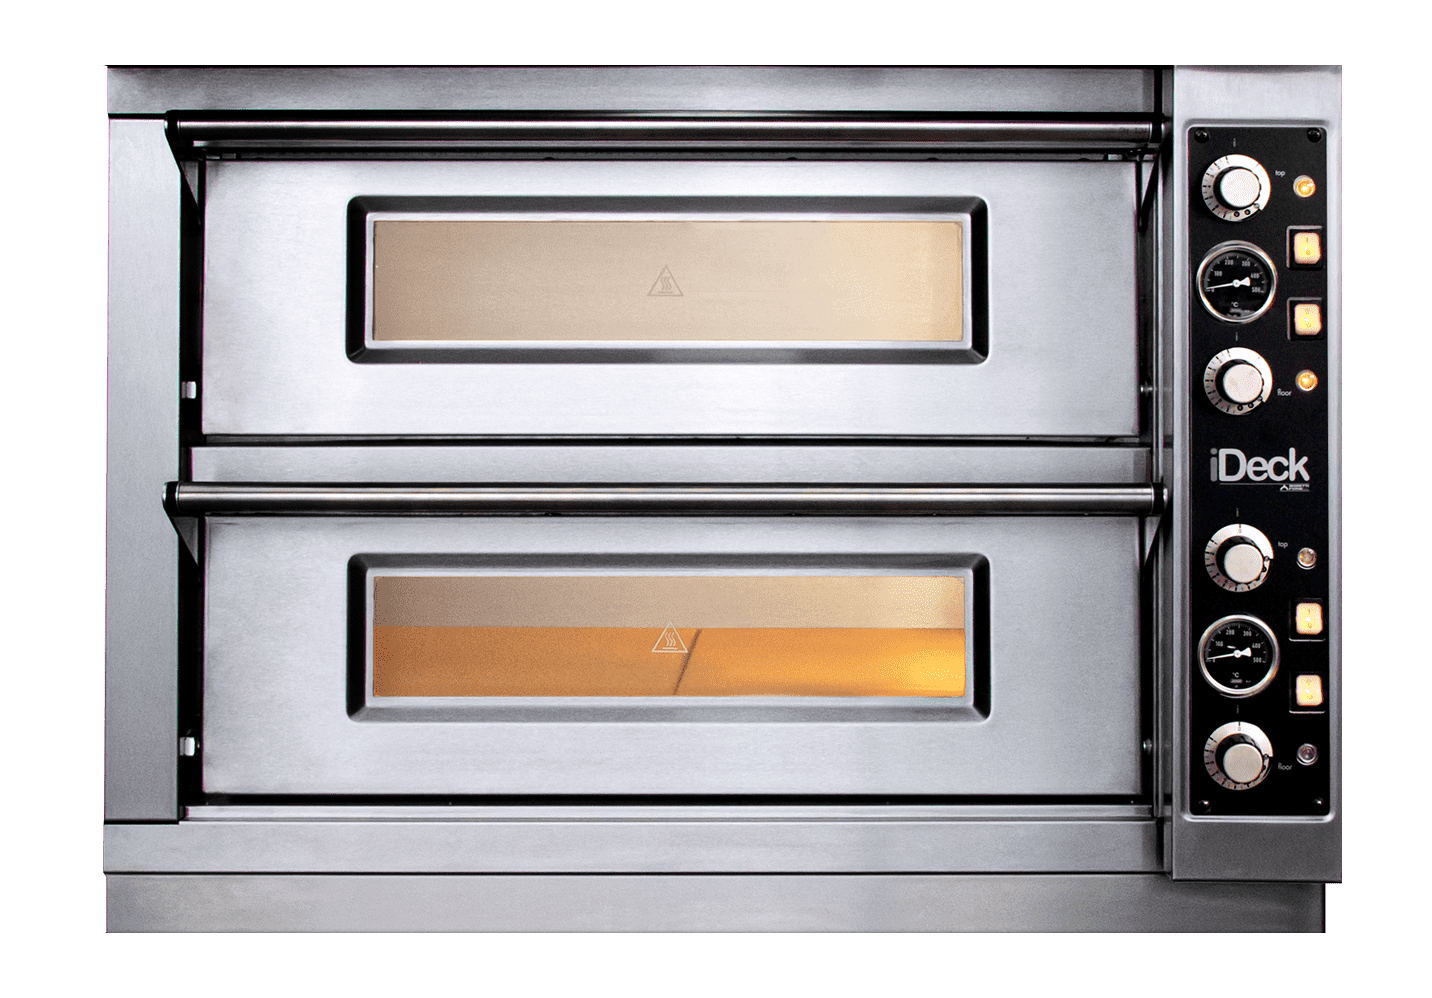 PD – Double Deck Electric Oven